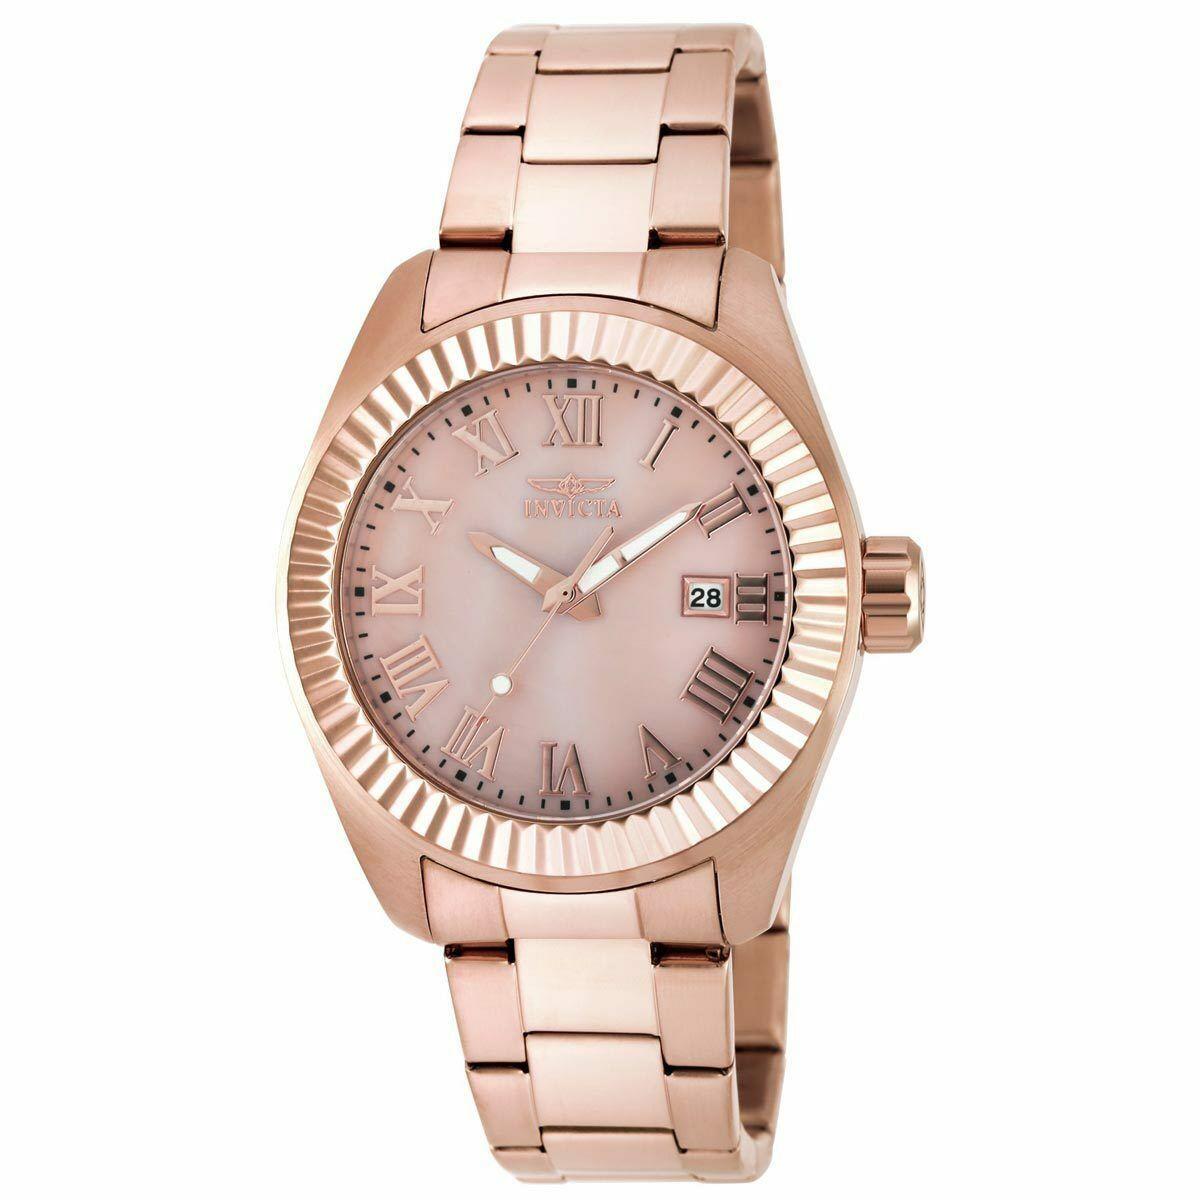 Invicta Women`s 20317 Angel Sport Watch Pink Dial Rose Gold Tone - Dial: Blue, Band: Silver, Black, Bezel: Silver